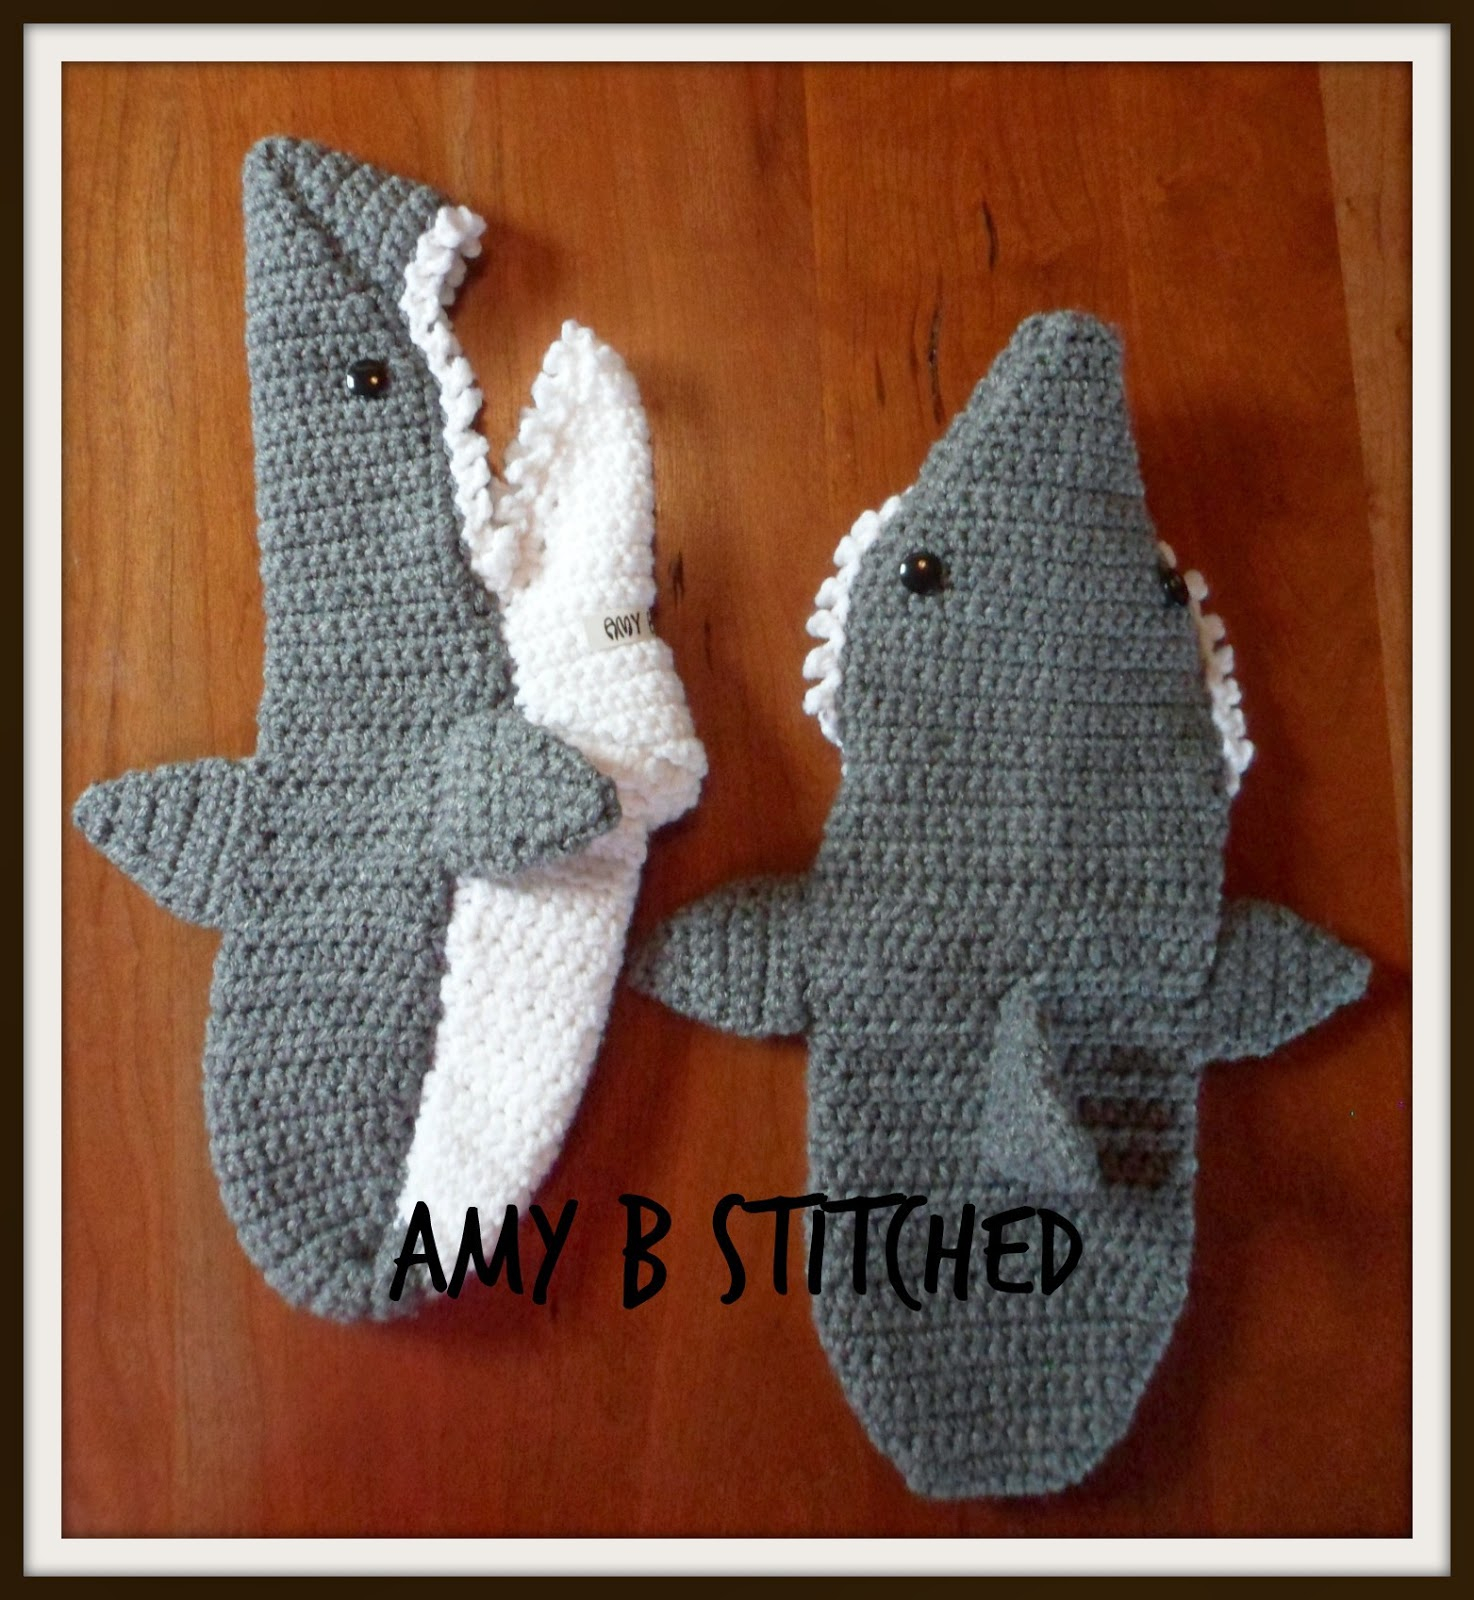 Crochet Bootie Pattern For Adults A Stitch At A Time For Amy B Stitched Crocheted Shark Slippers